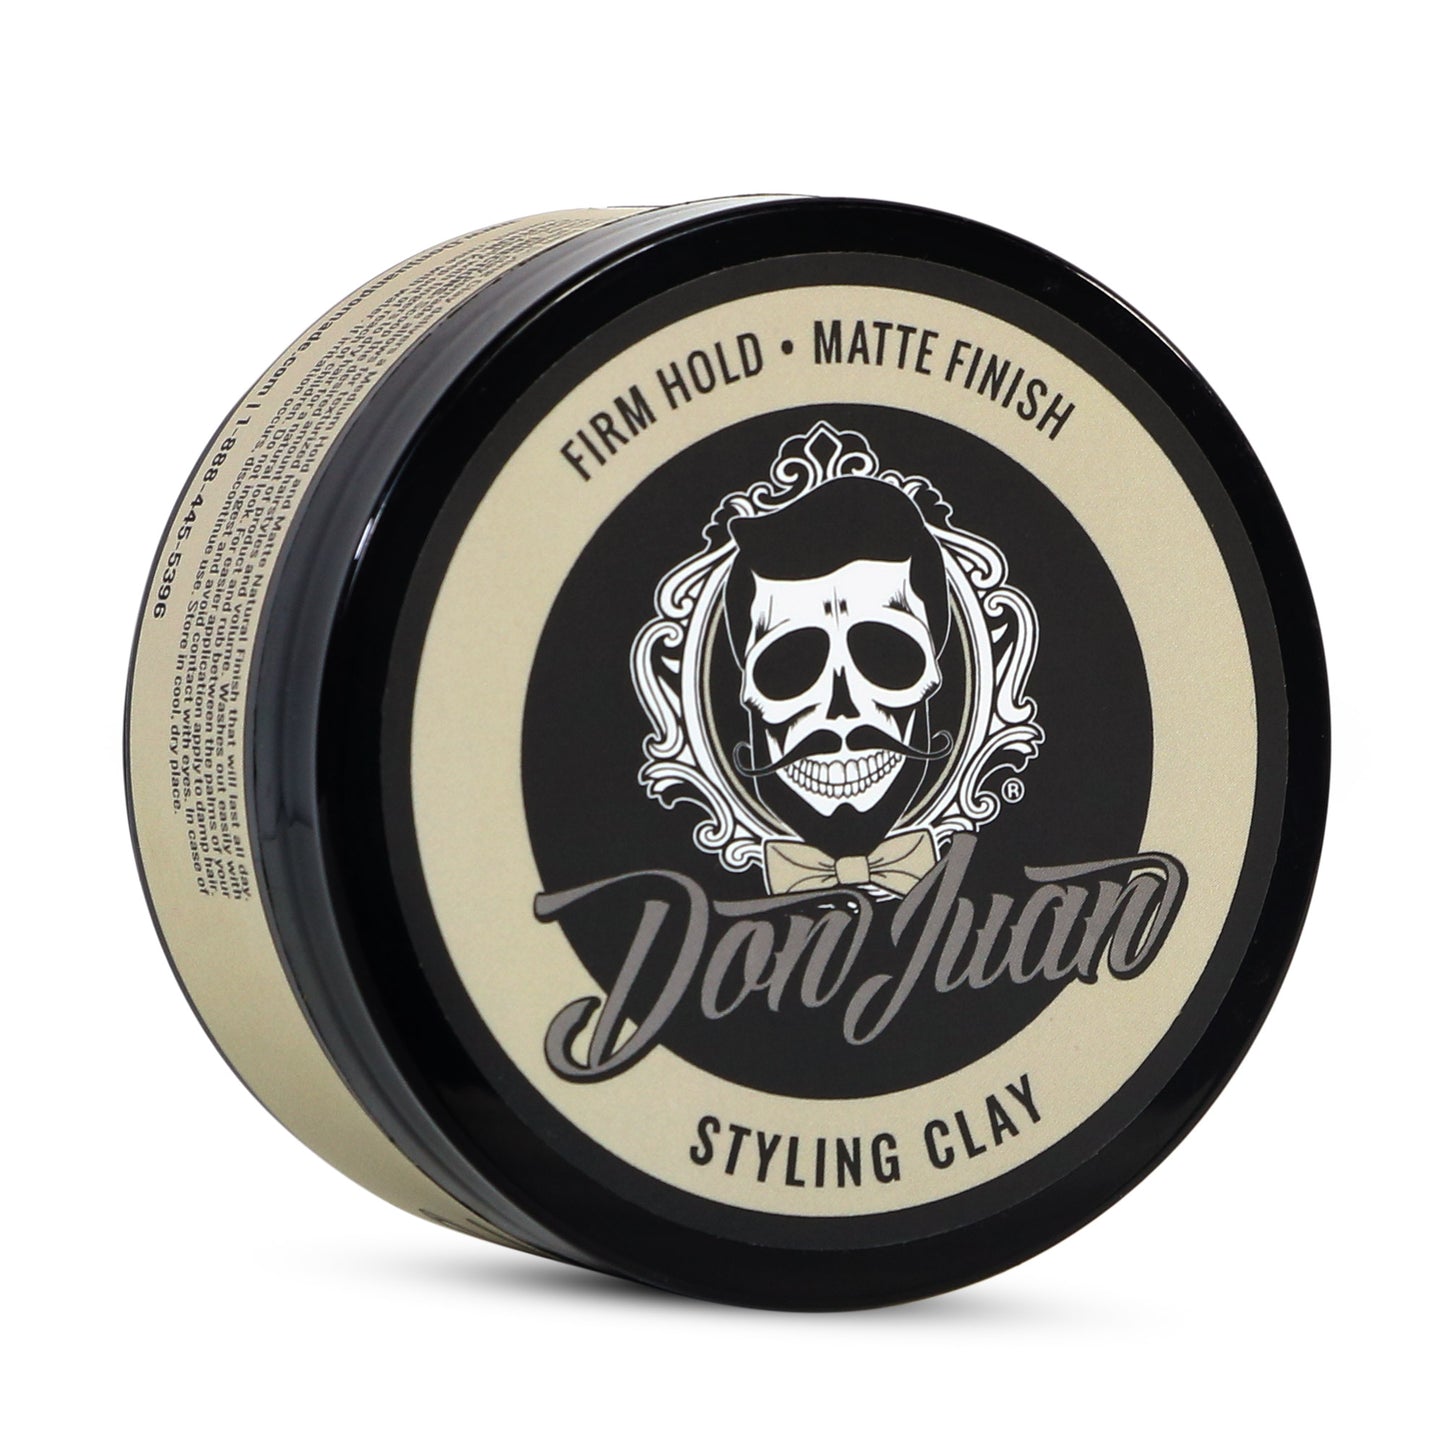 Don Juan Handcrafted Styling Clay